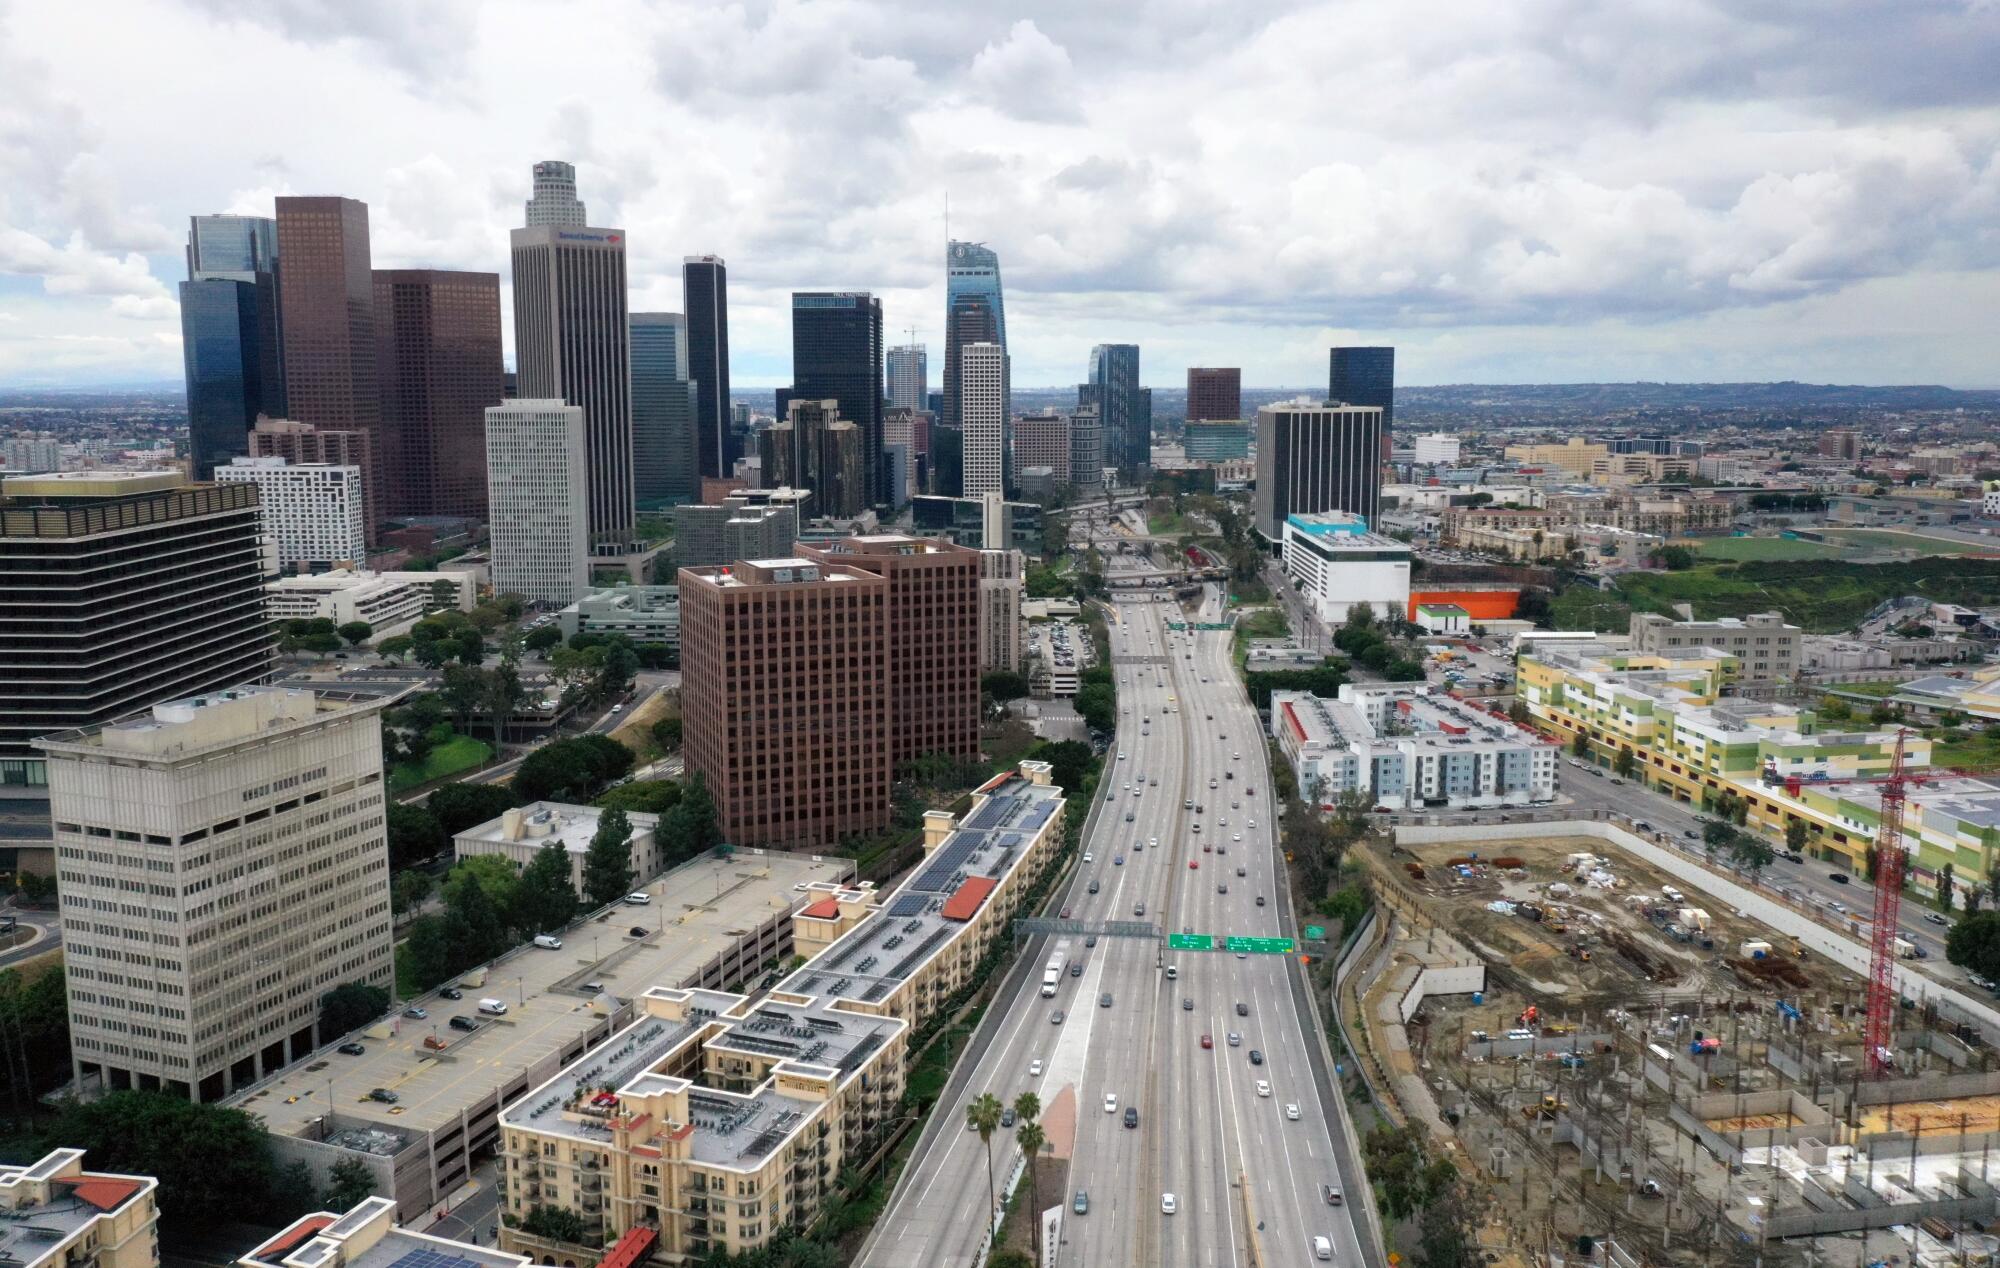 Downtown L.A. traffic is noticeably reduced on March 19.